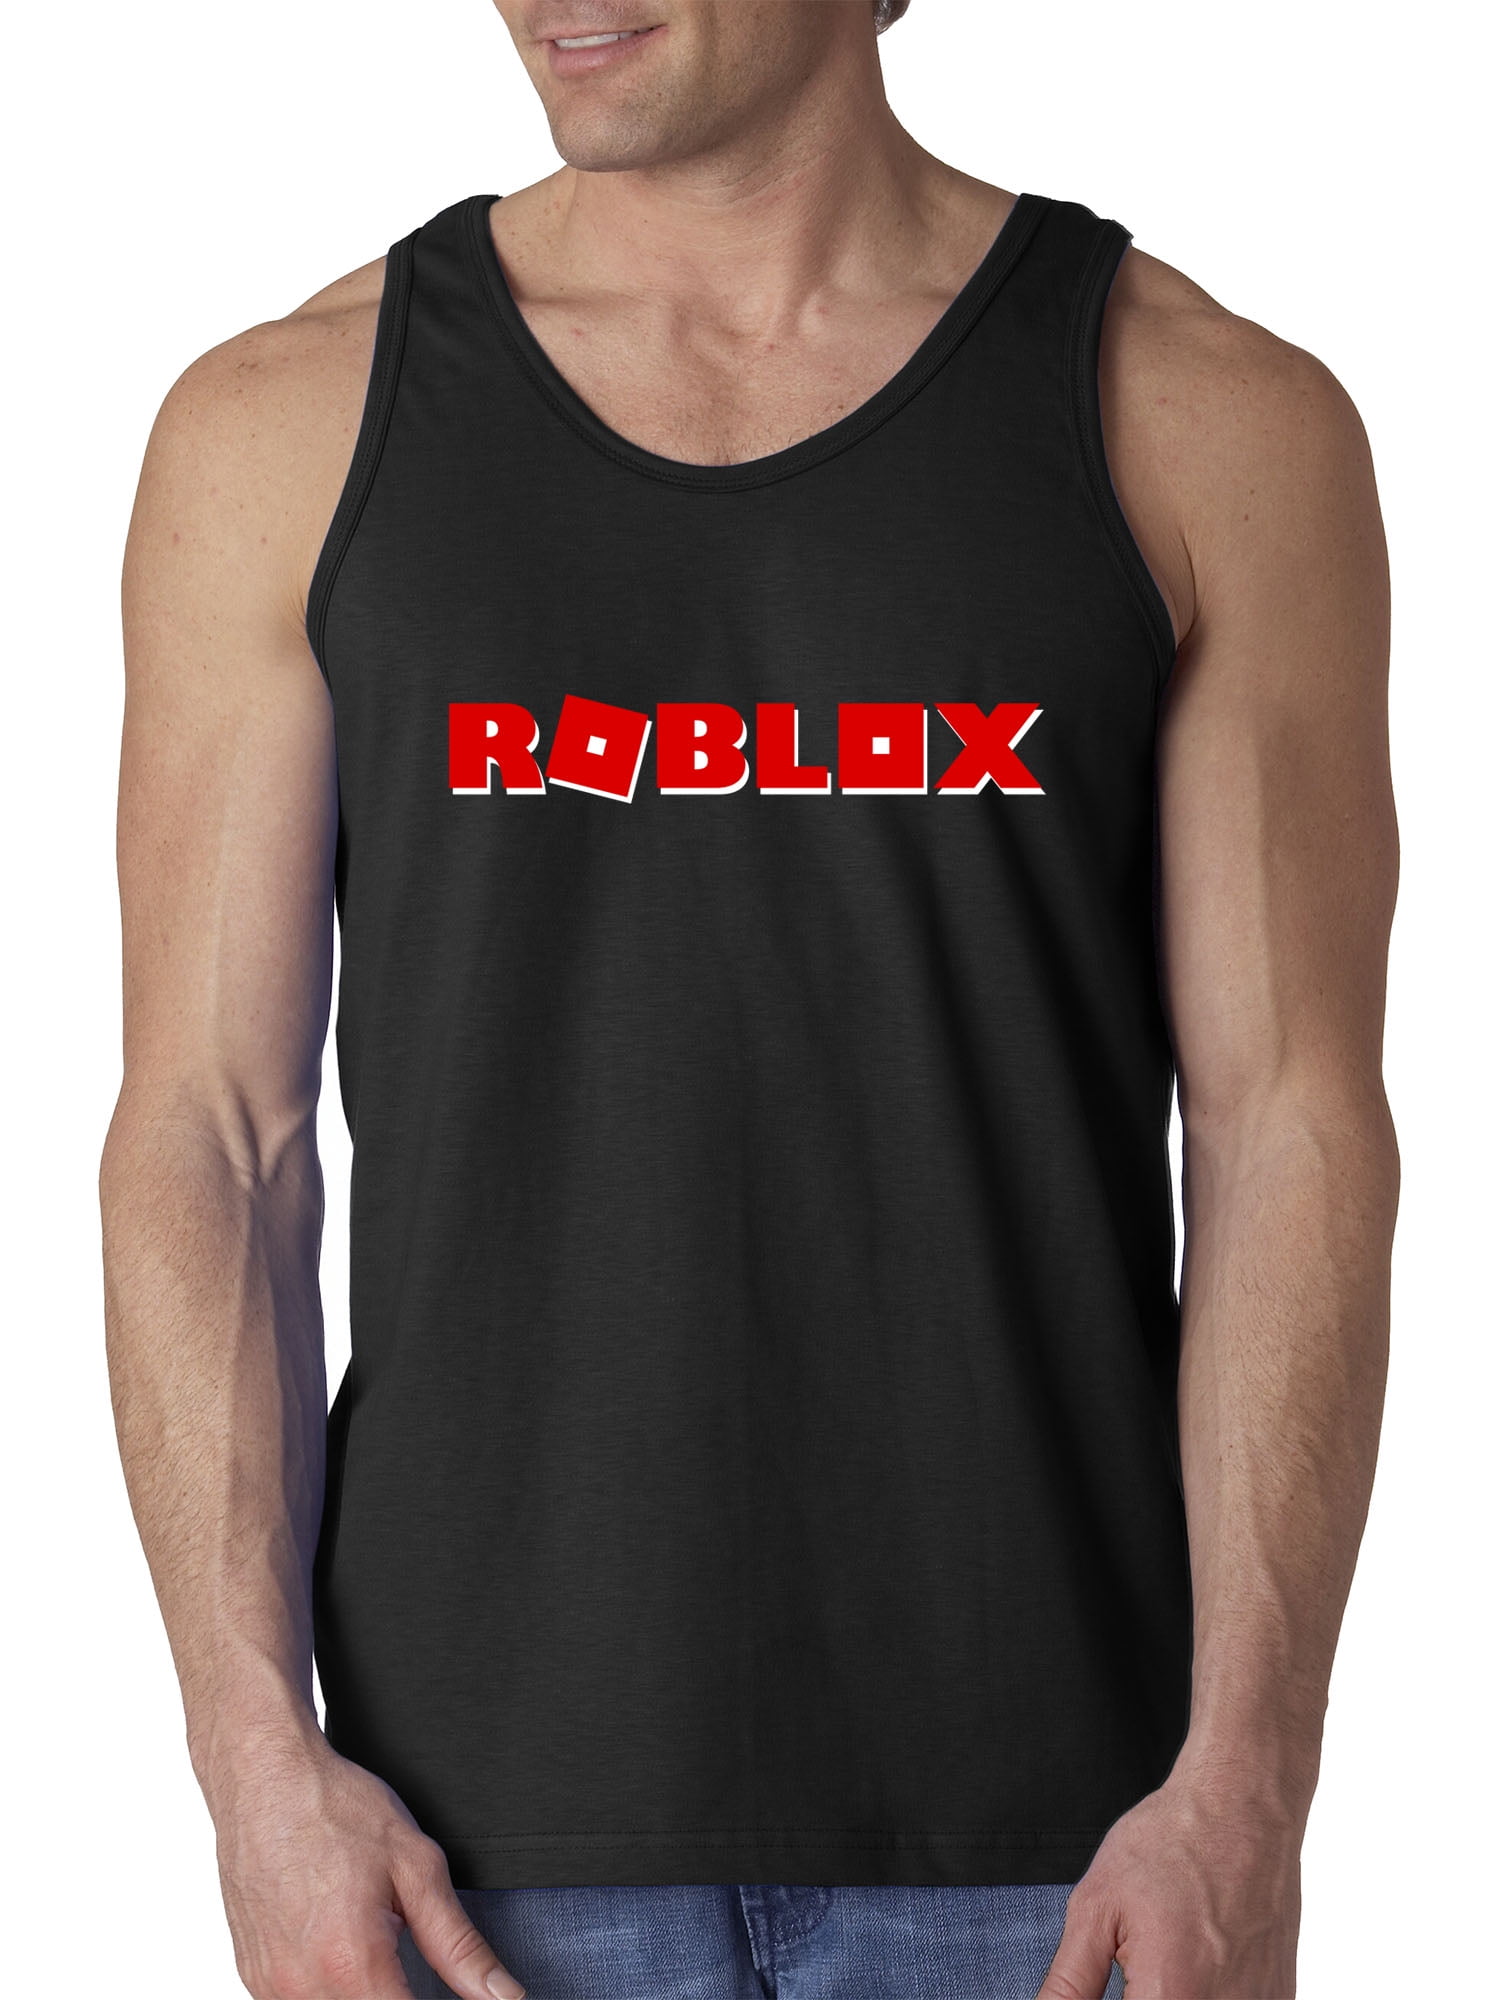 New Way New Way 922 Mens Tank Top Roblox Logo Game - how to wear 2 face accessories on roblox roblox muscle